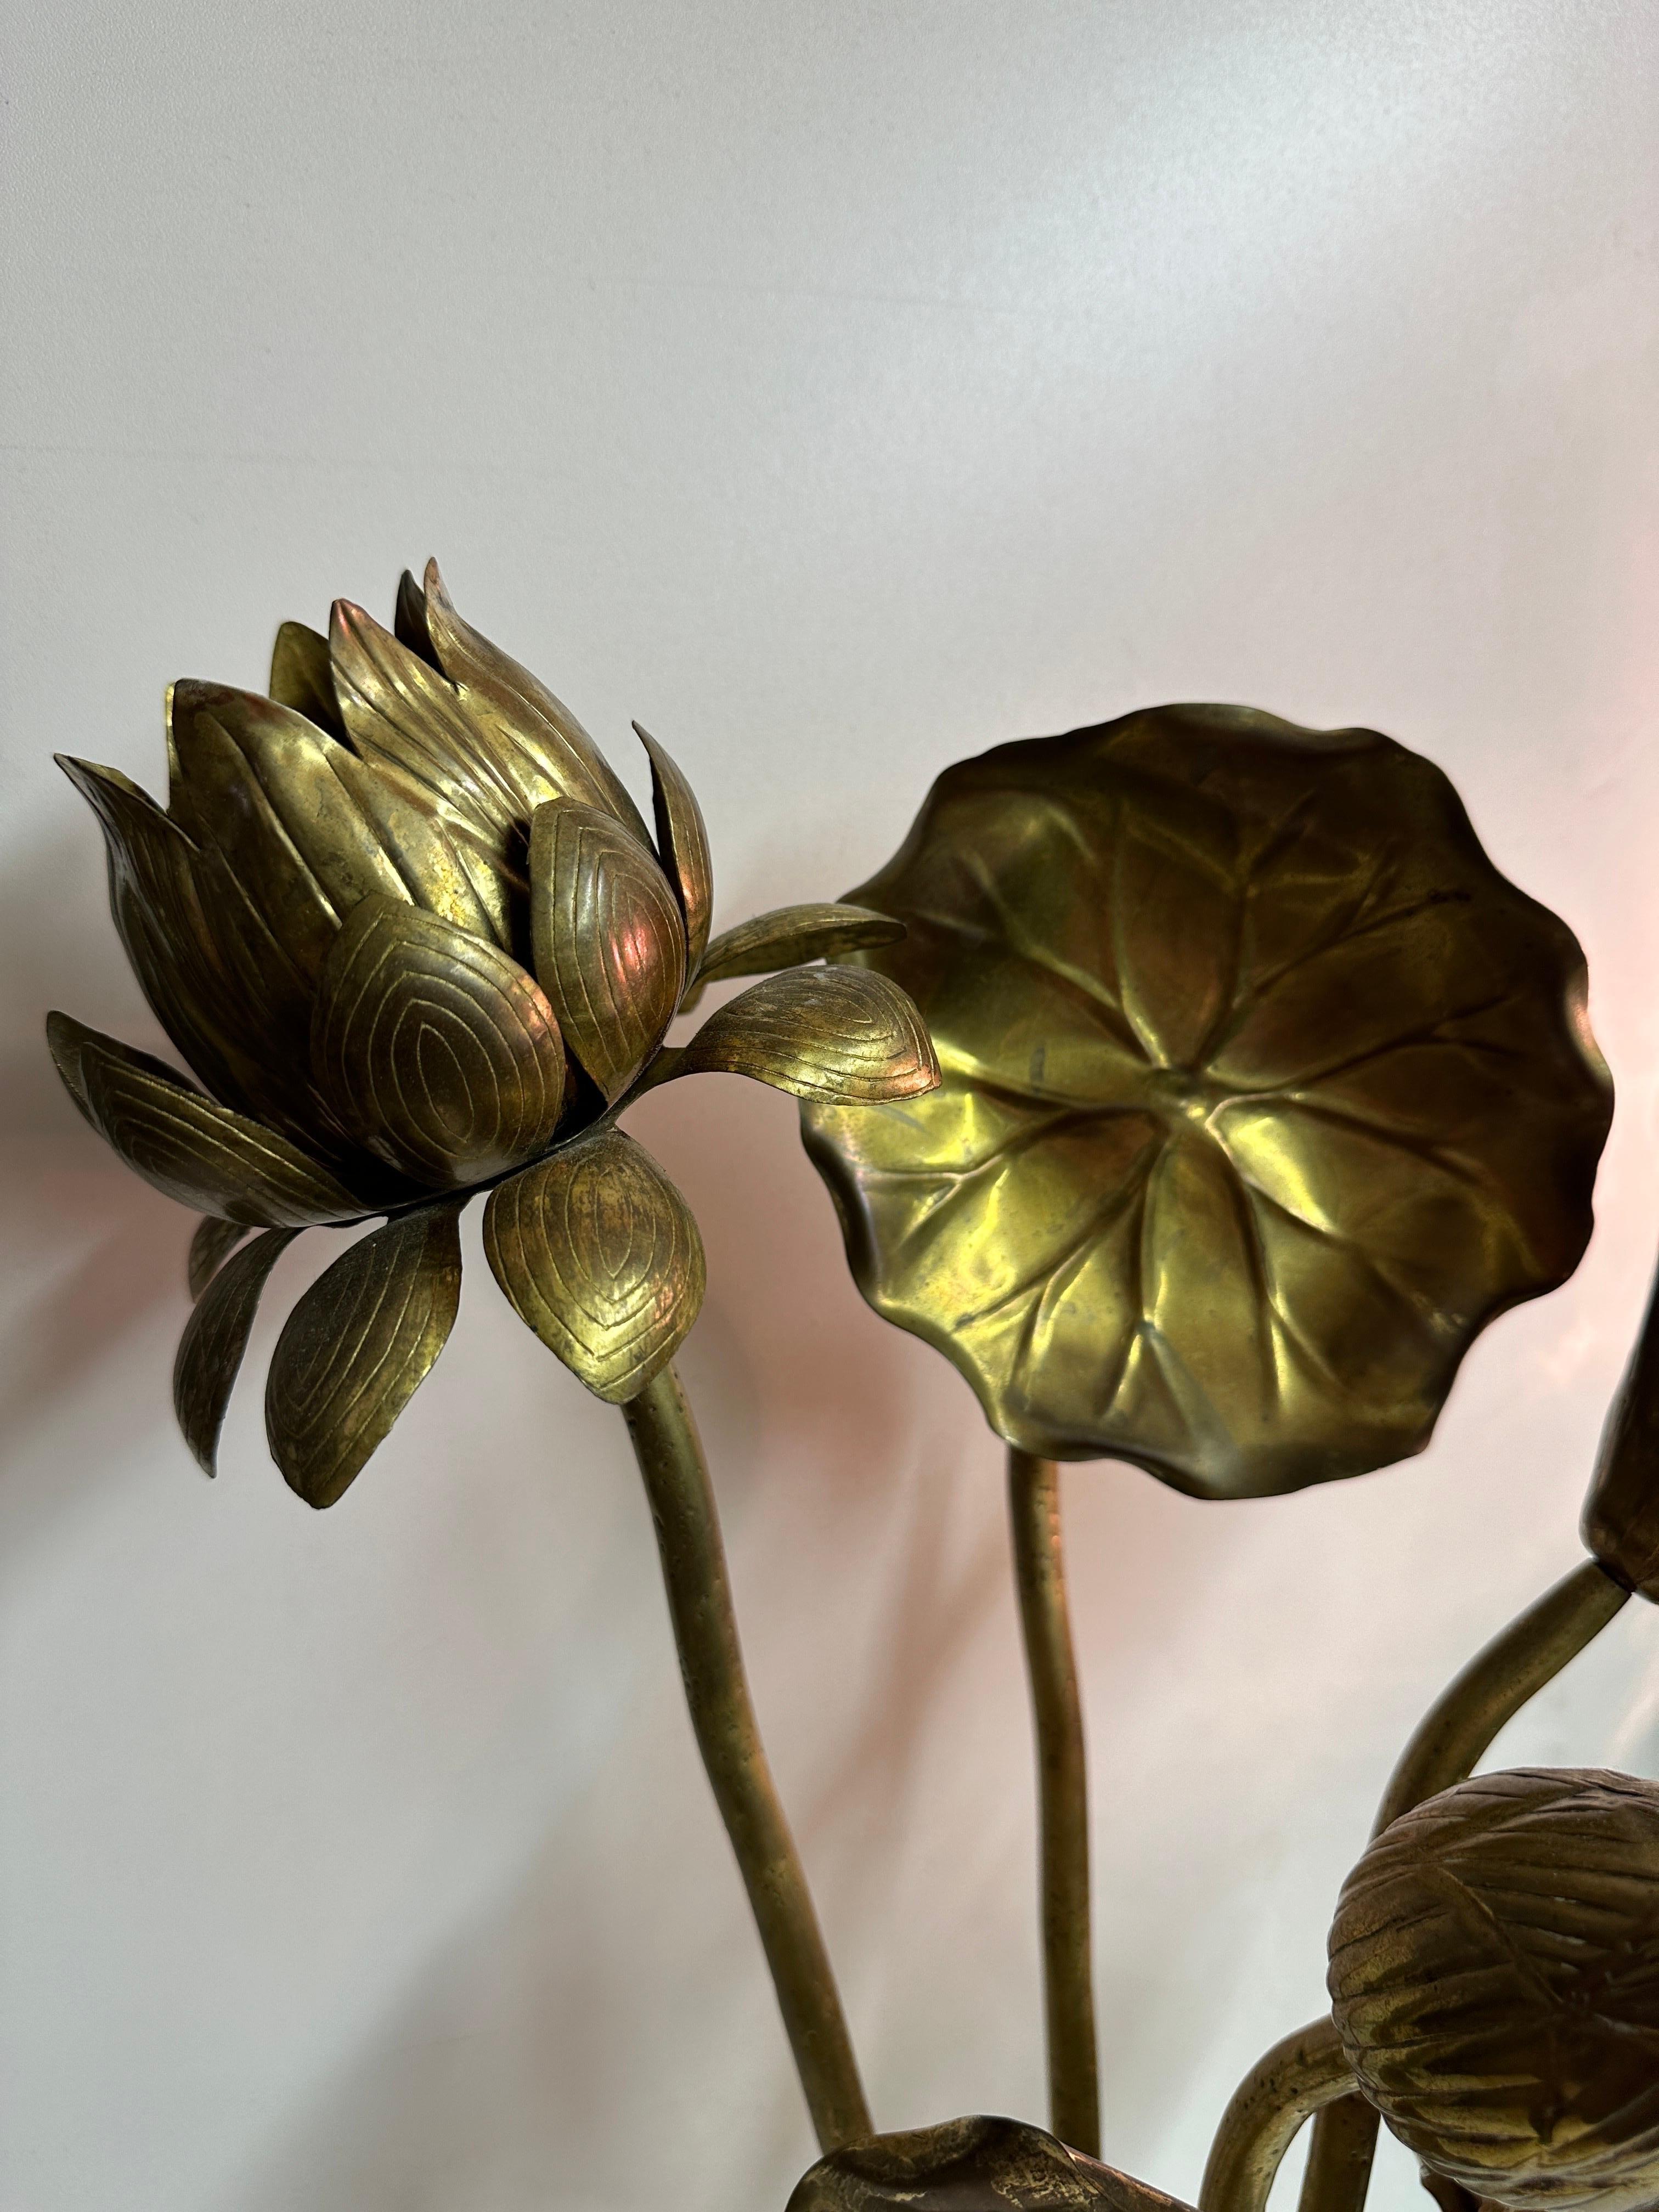 Set of six bouquet of Feldman brass lotus flowers in all original patina. Glass vase shown is not included. Tallest lotus is 24” tall, shortest is 15” tall.